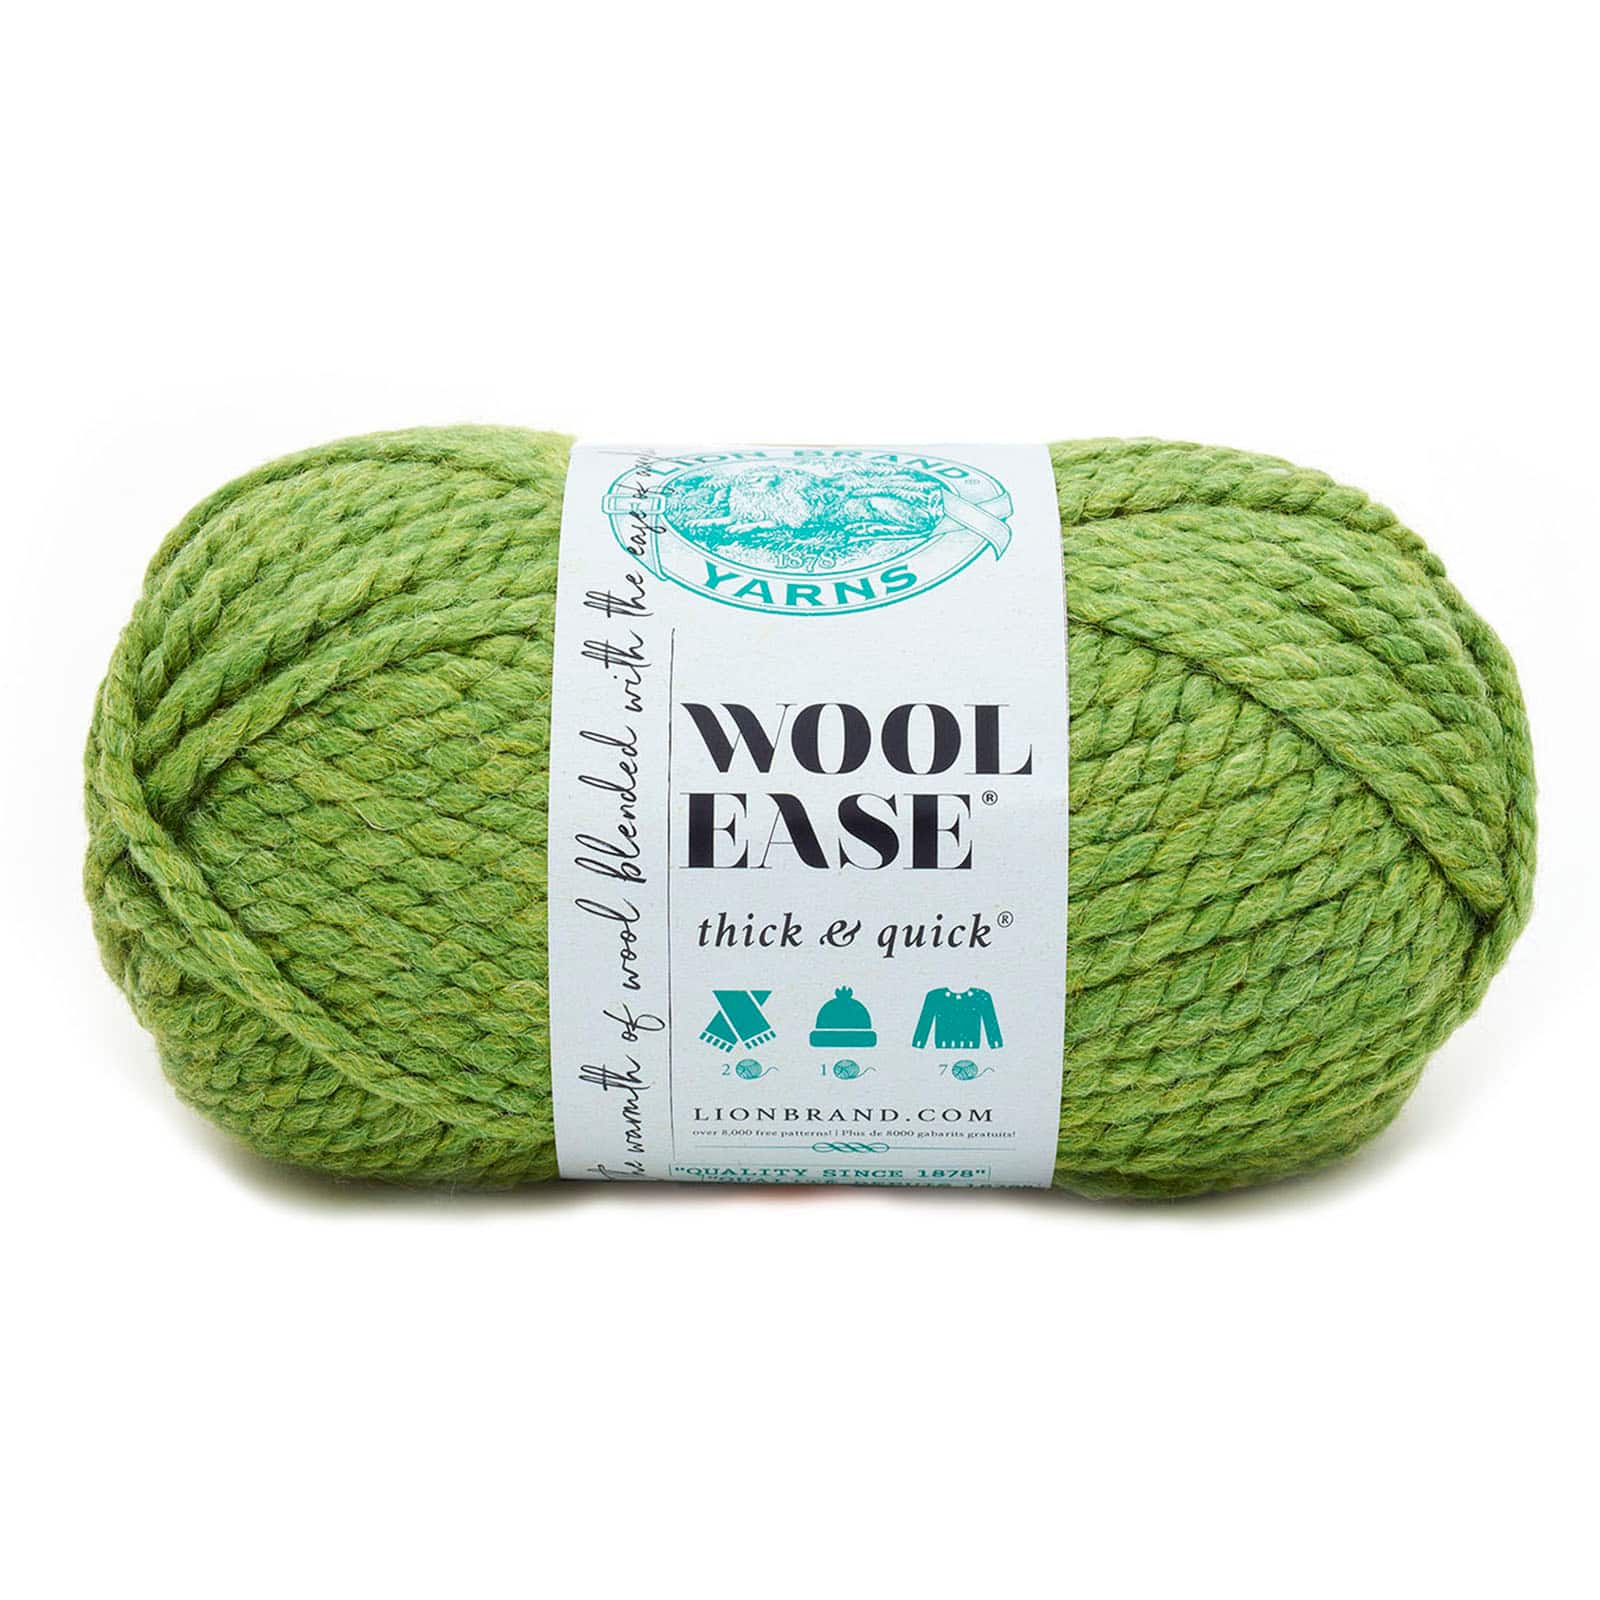 Lion Brand Jiffy Thick and Quick Yarn Green Mountains Variegated Blues and  Greens 